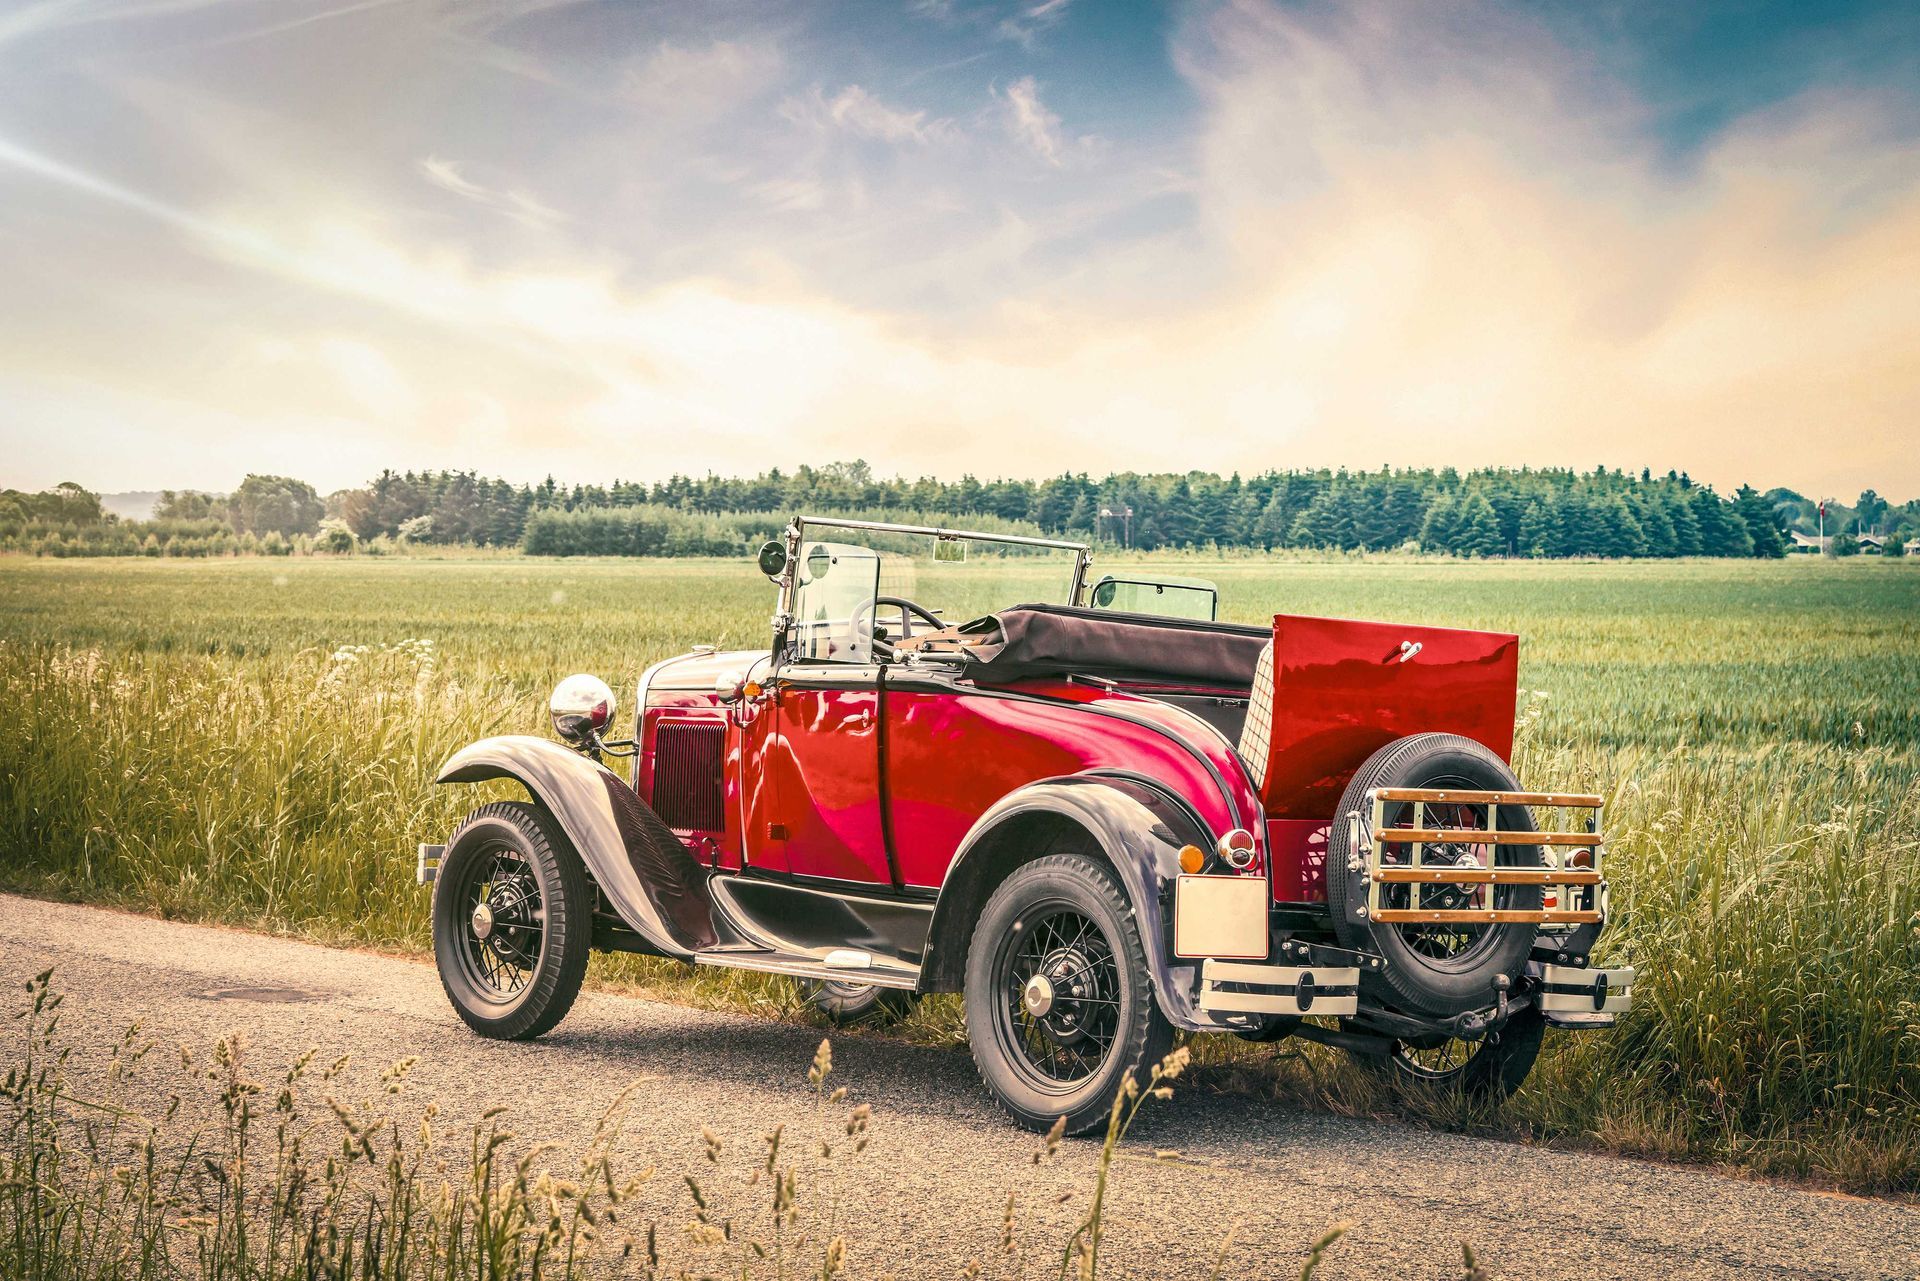 A very old car in cool automobile photography photo